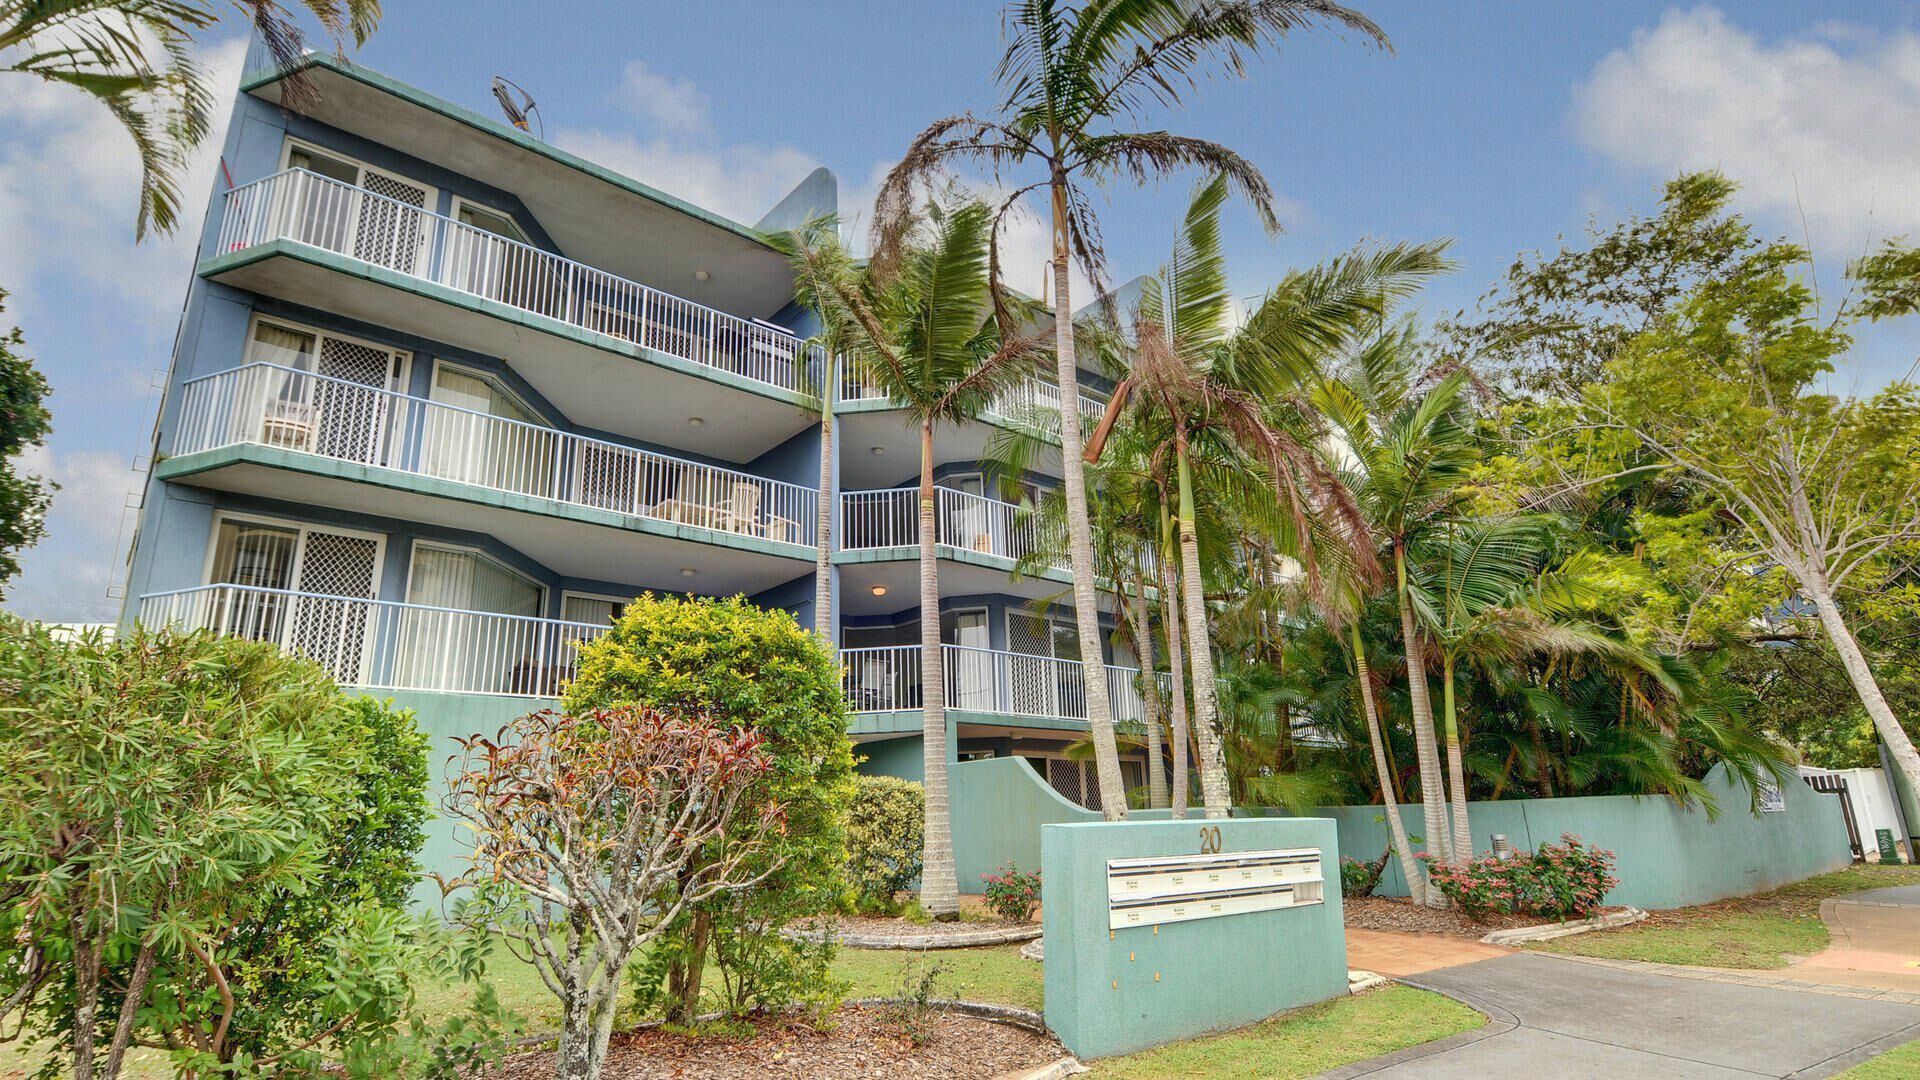 Mainsail 3 - 2 Bedroom unit 100 meters from the Beach!